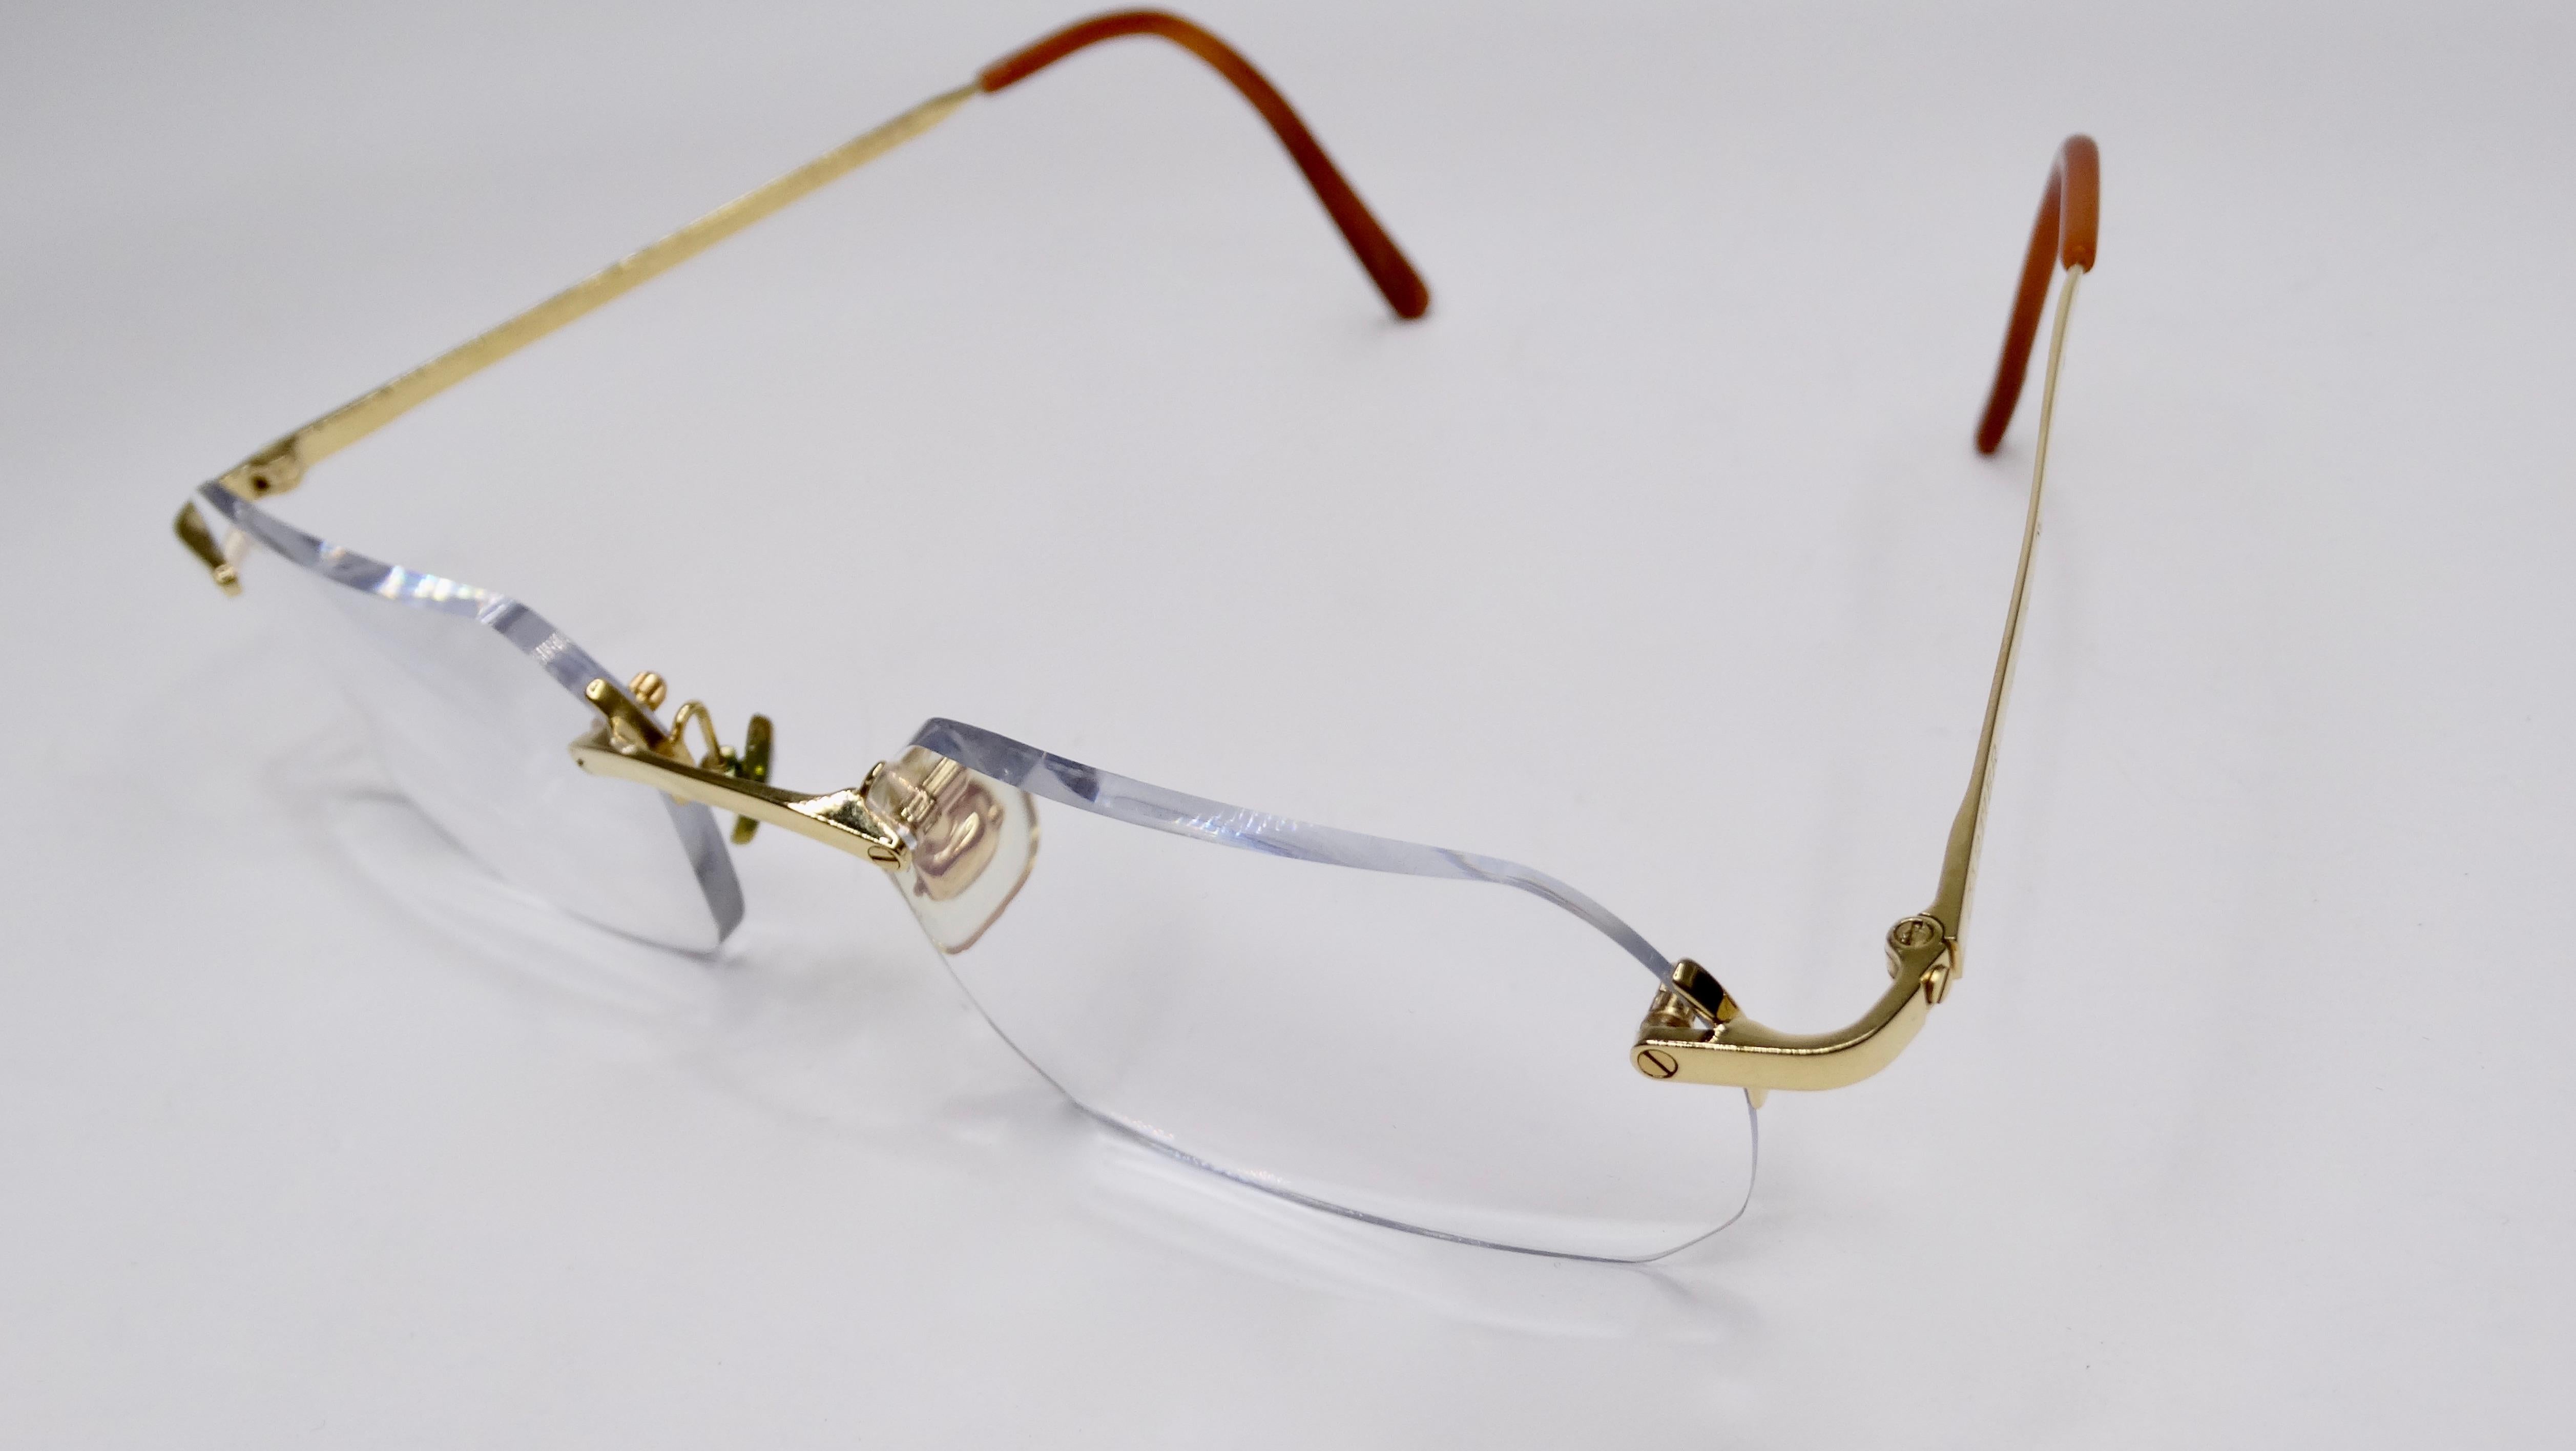 A favorite of both jewelry and fashion lovers, Cartier is always a classic! Circa 1980s, these rimless glasses feature an 18k gold plated frame with Cartier stamped on both arms. The lenses in these glasses are prescription and will have to be